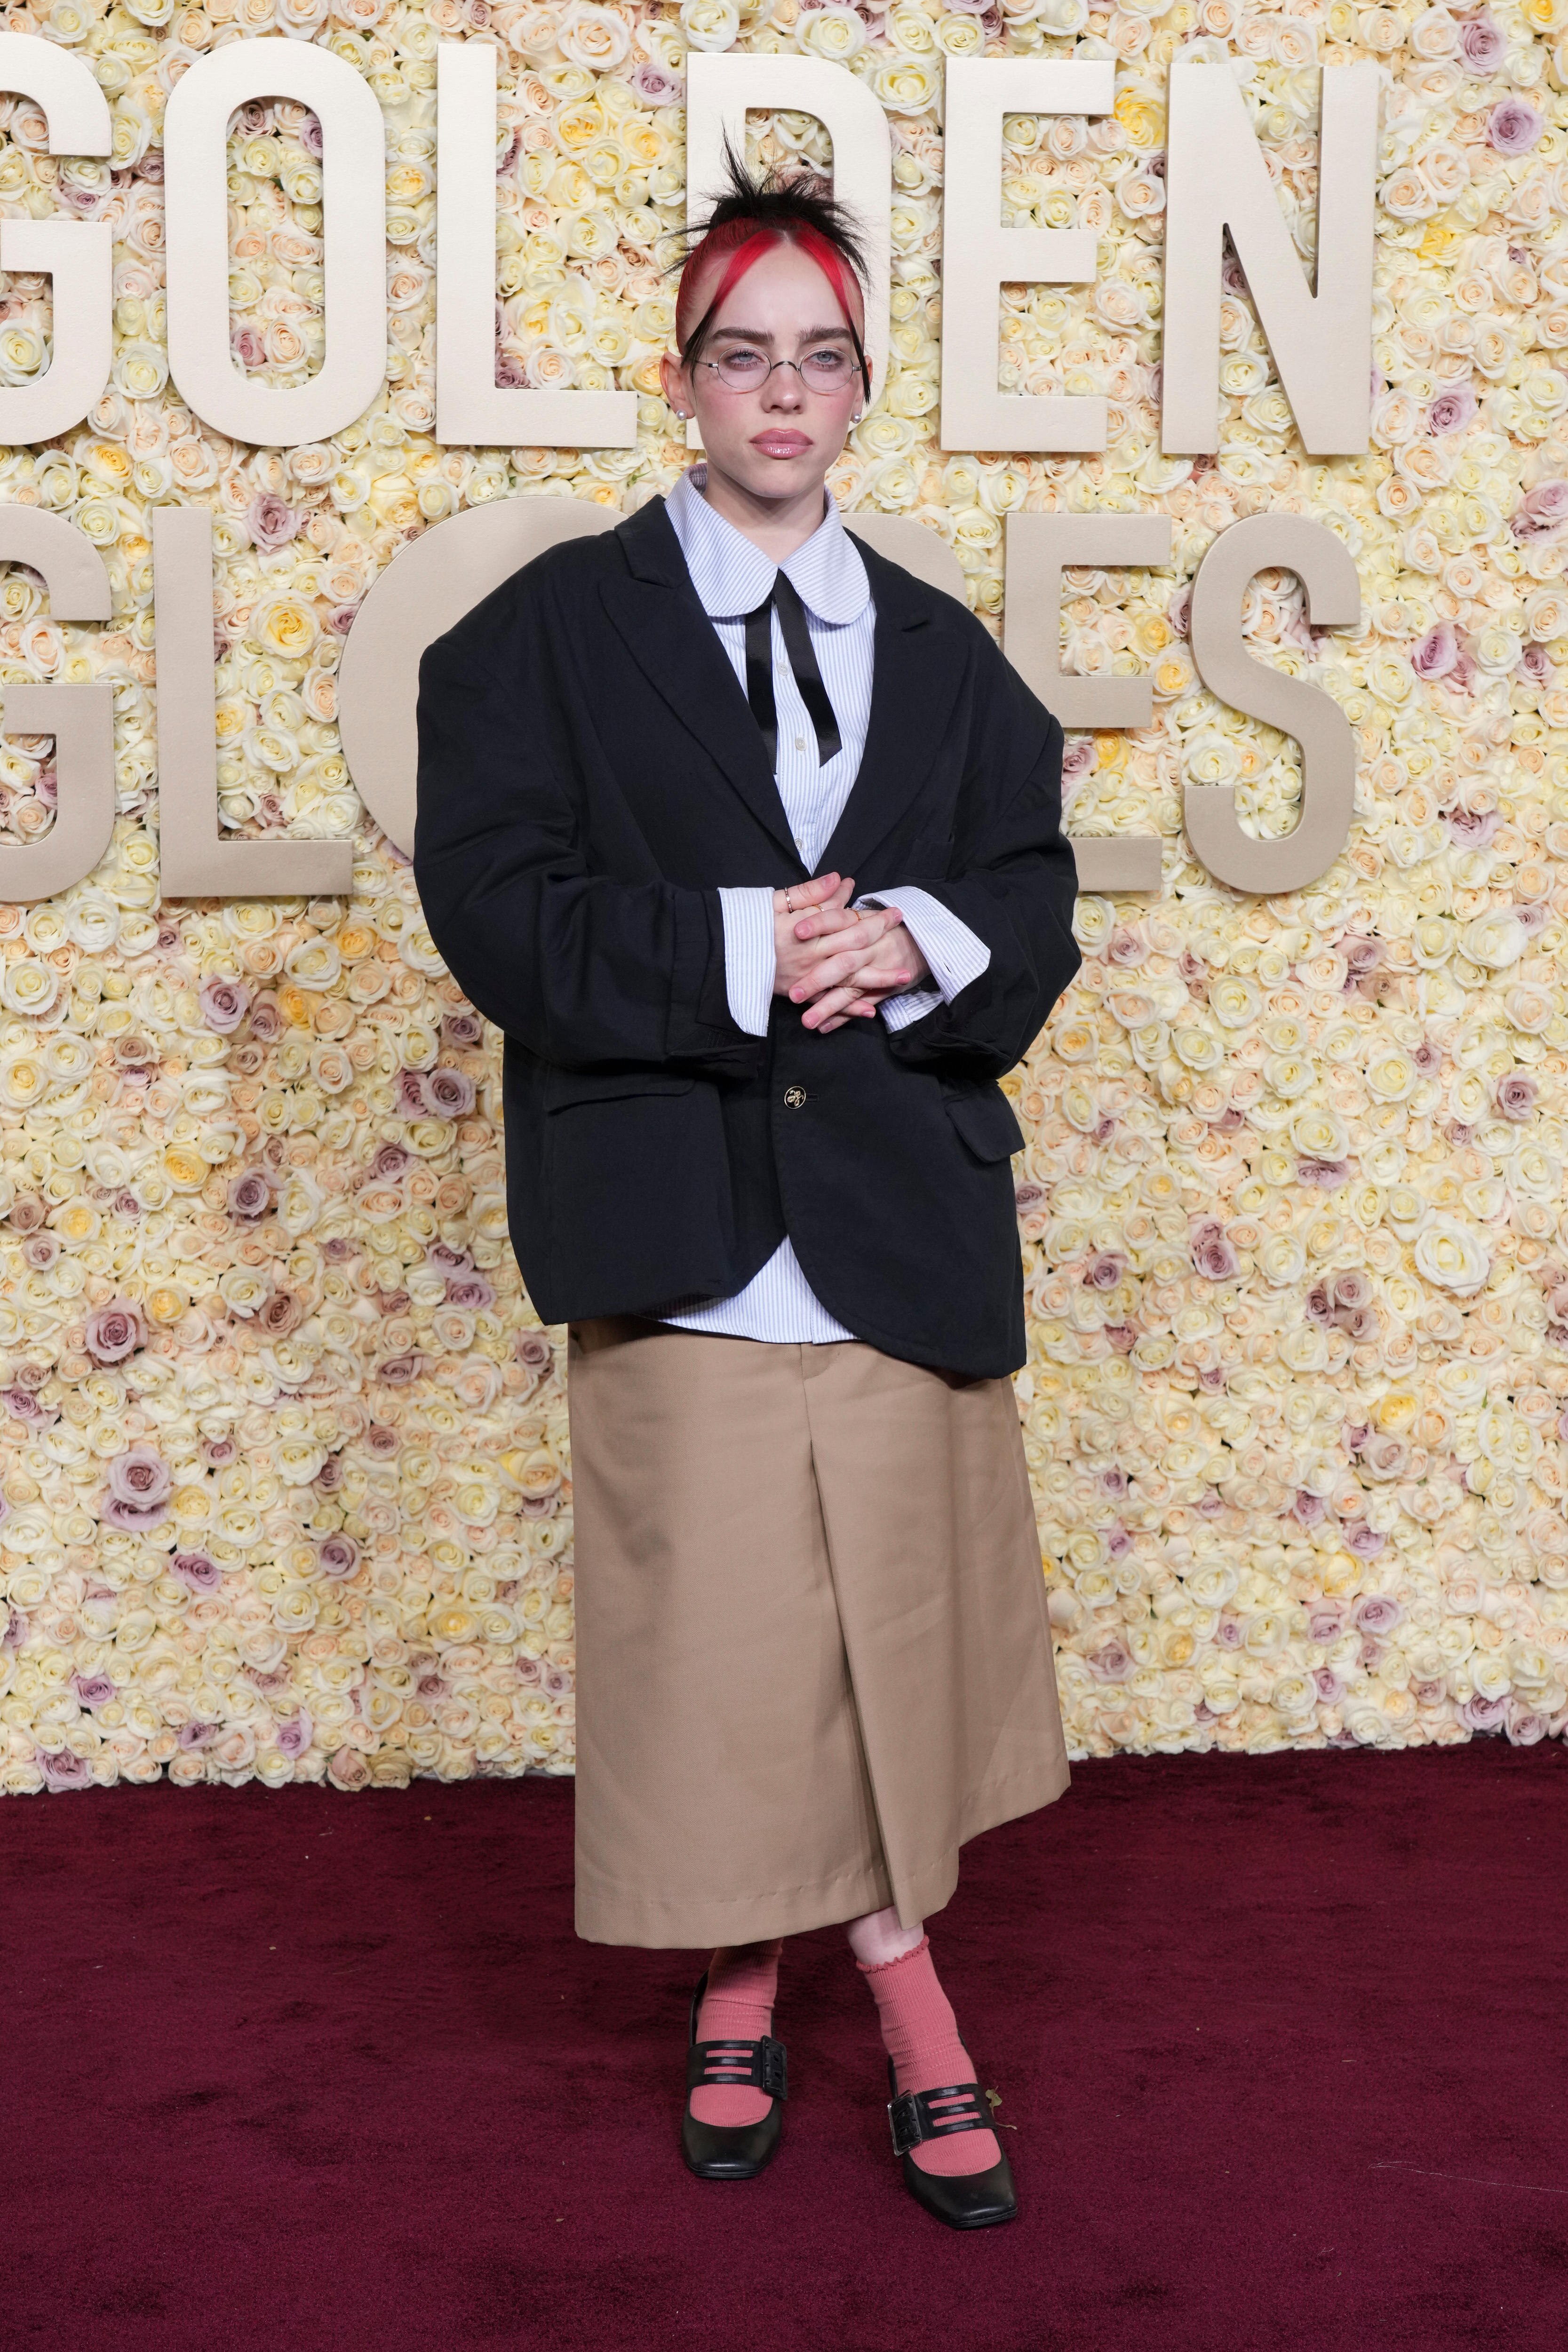 Artist Billie Eilish wore an oversized top and long baggy skirt to the golden globes red carpet